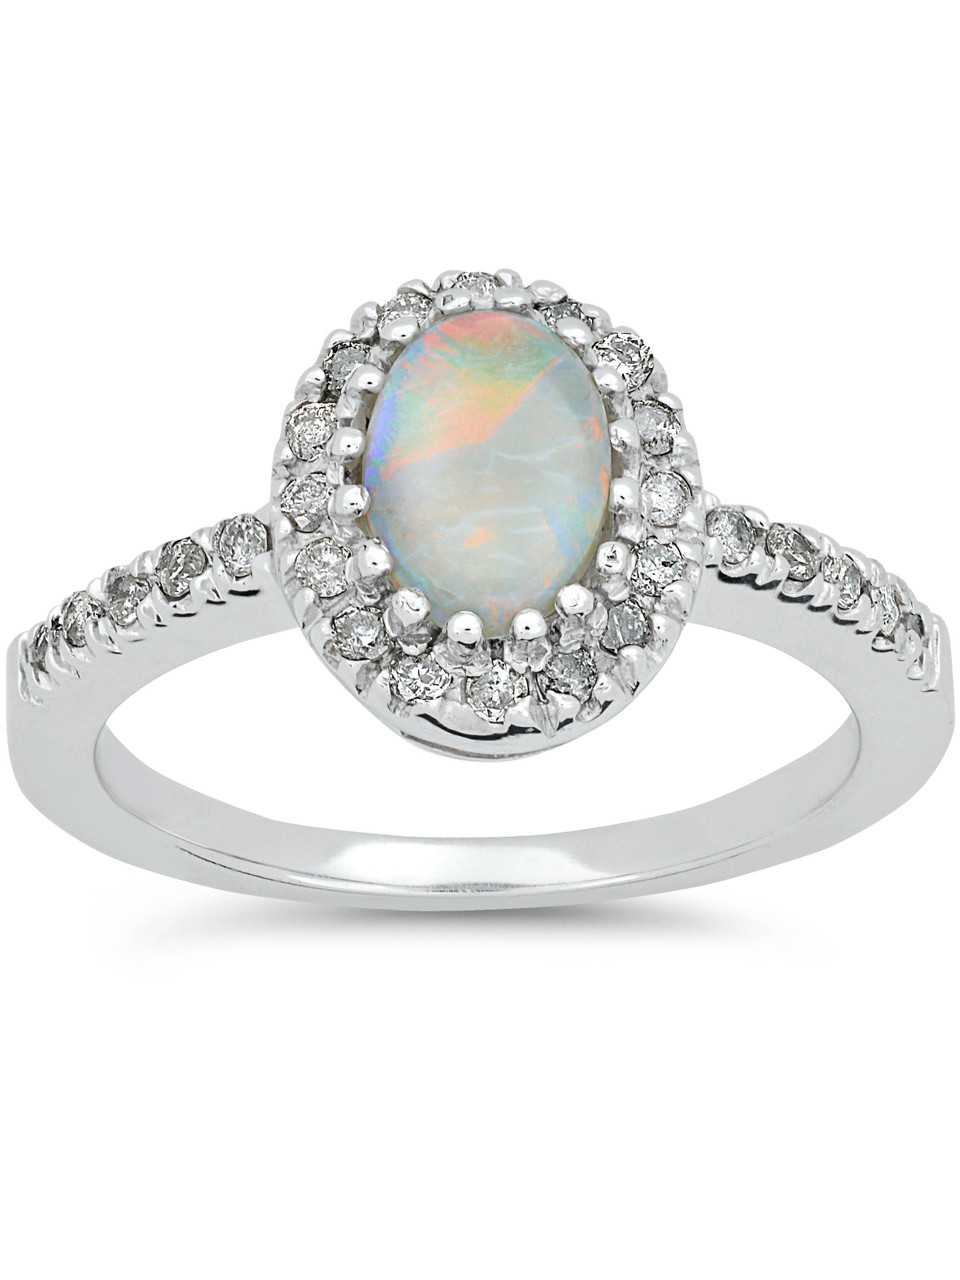 oval opal and diamond halo ring